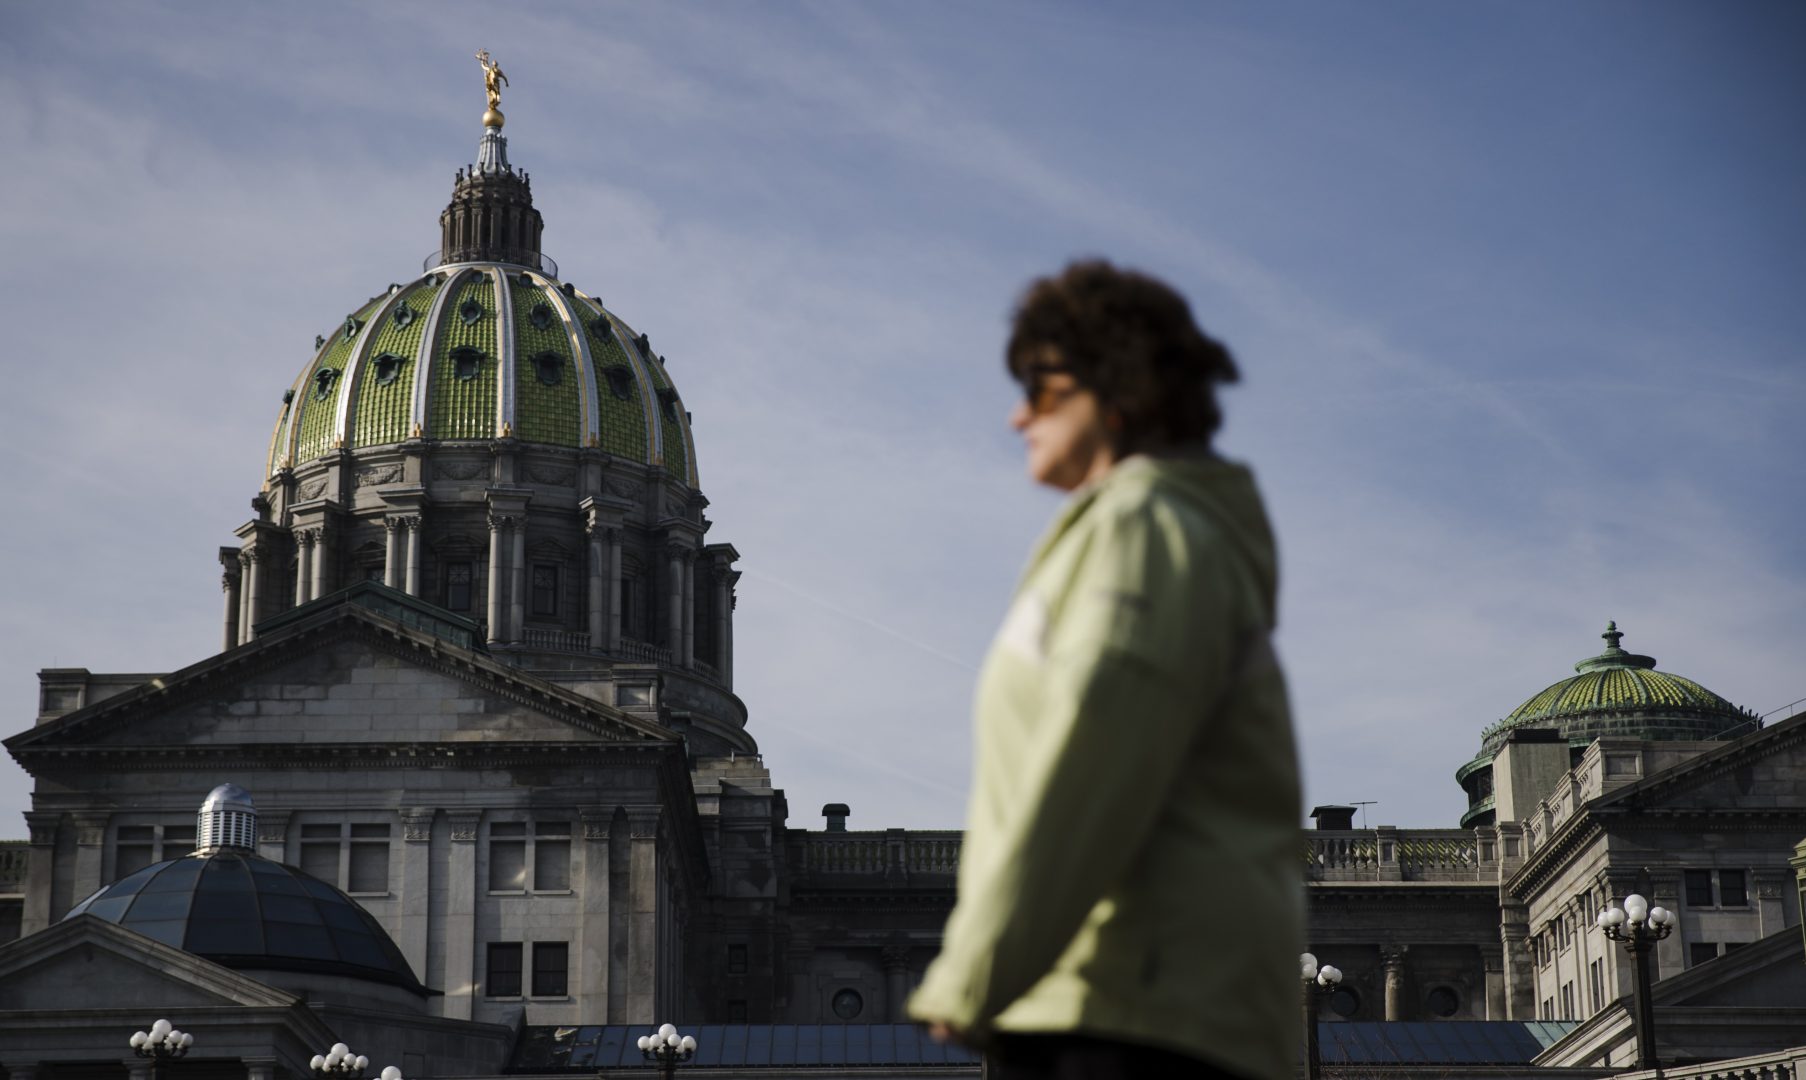 A pedestrian walks past the dome of the Pennsylvania Capitol on Feb. 5, 2019.